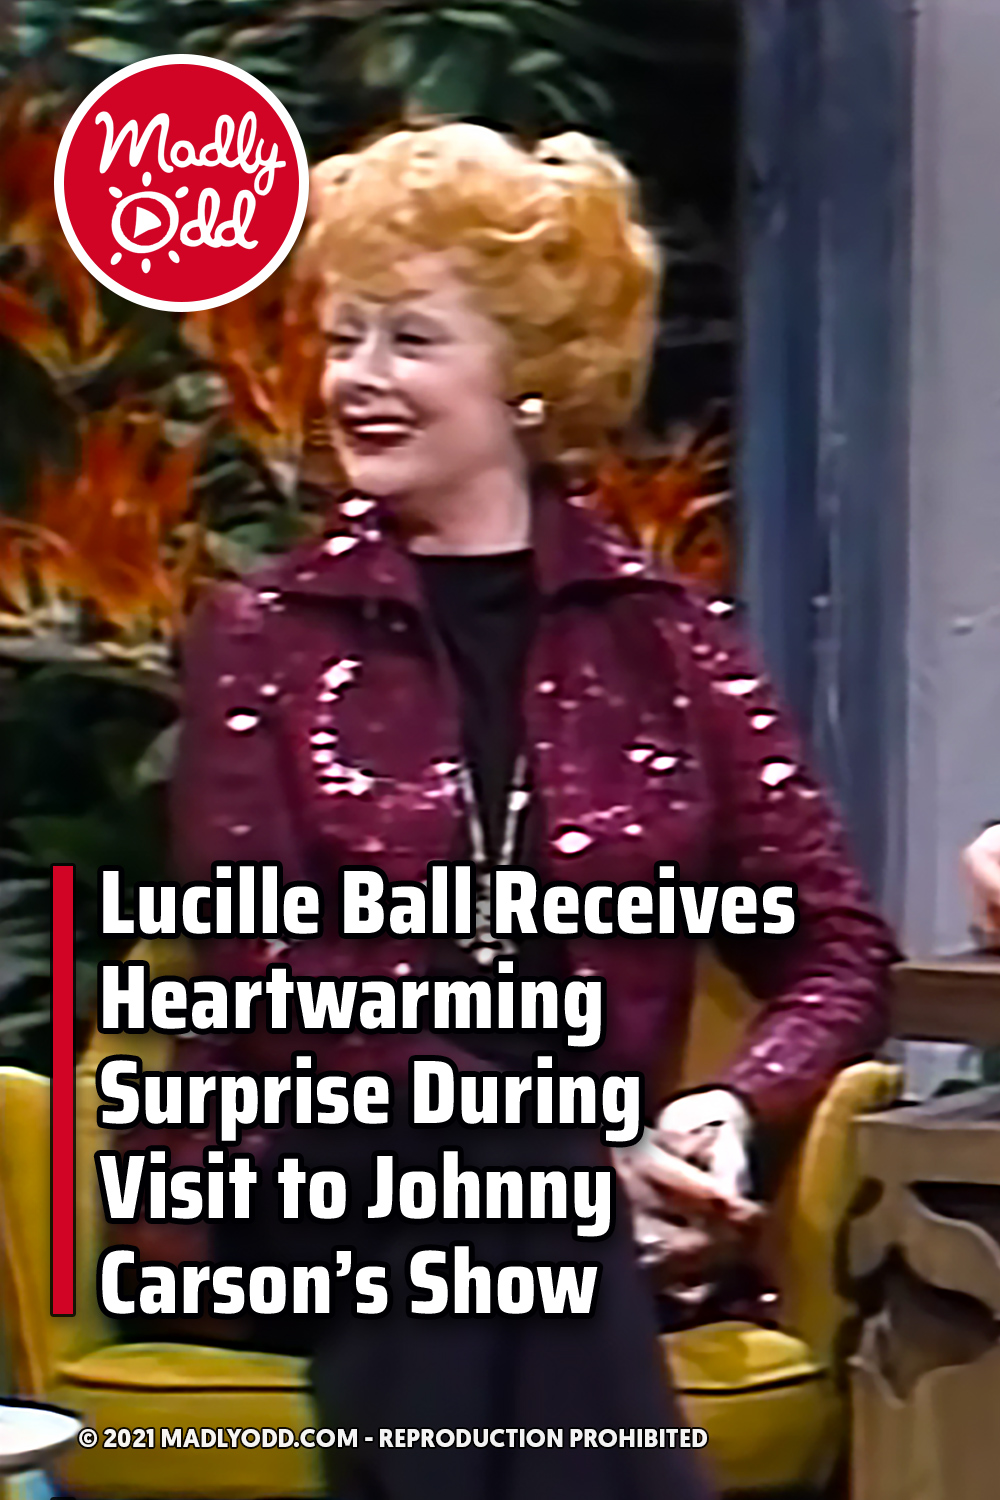 Lucille Ball Receives Heartwarming Surprise During Visit to Johnny Carson’s Show